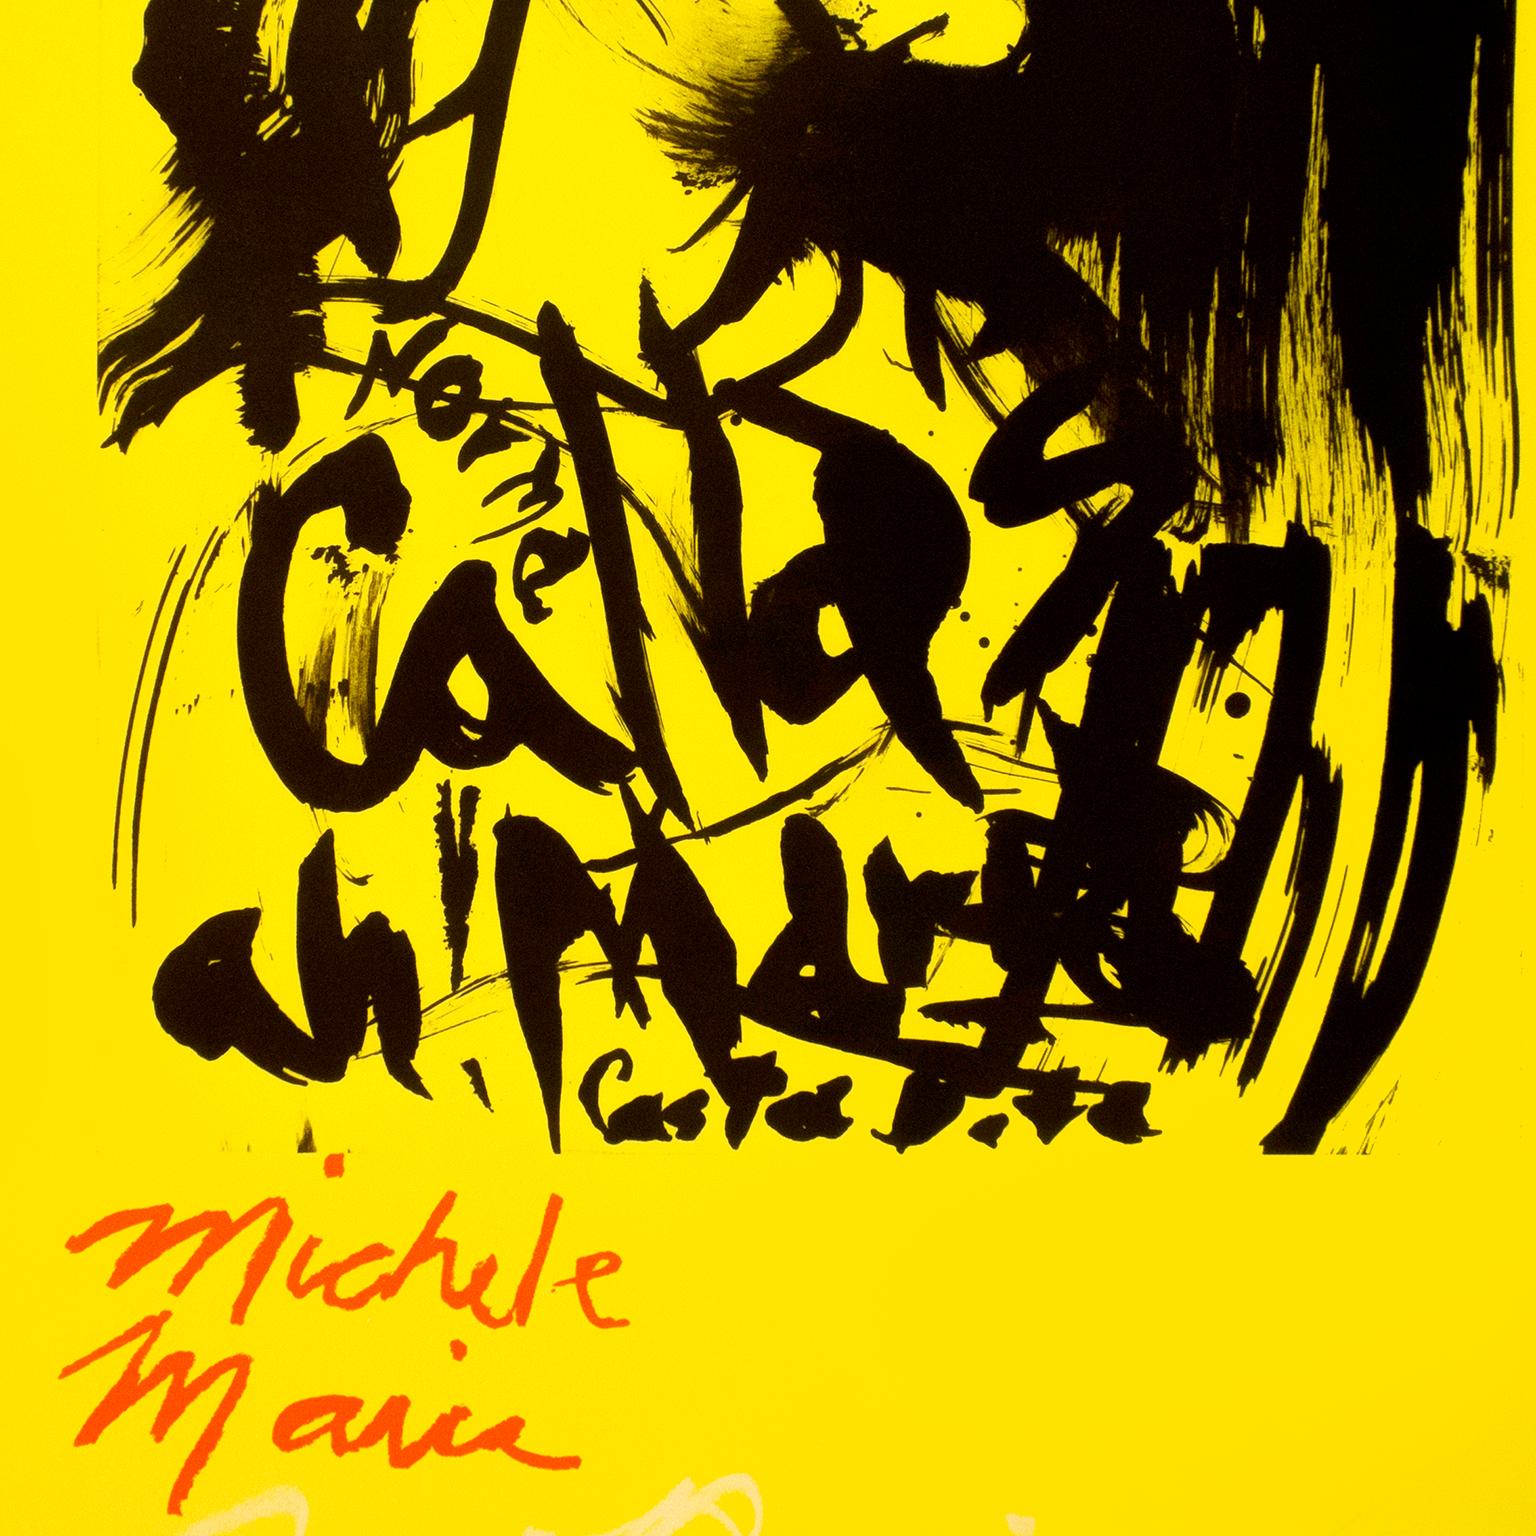 Michele Maria: bright yellow red Maria Callas opera artist portrait with poetry  - Print by Rene Ricard